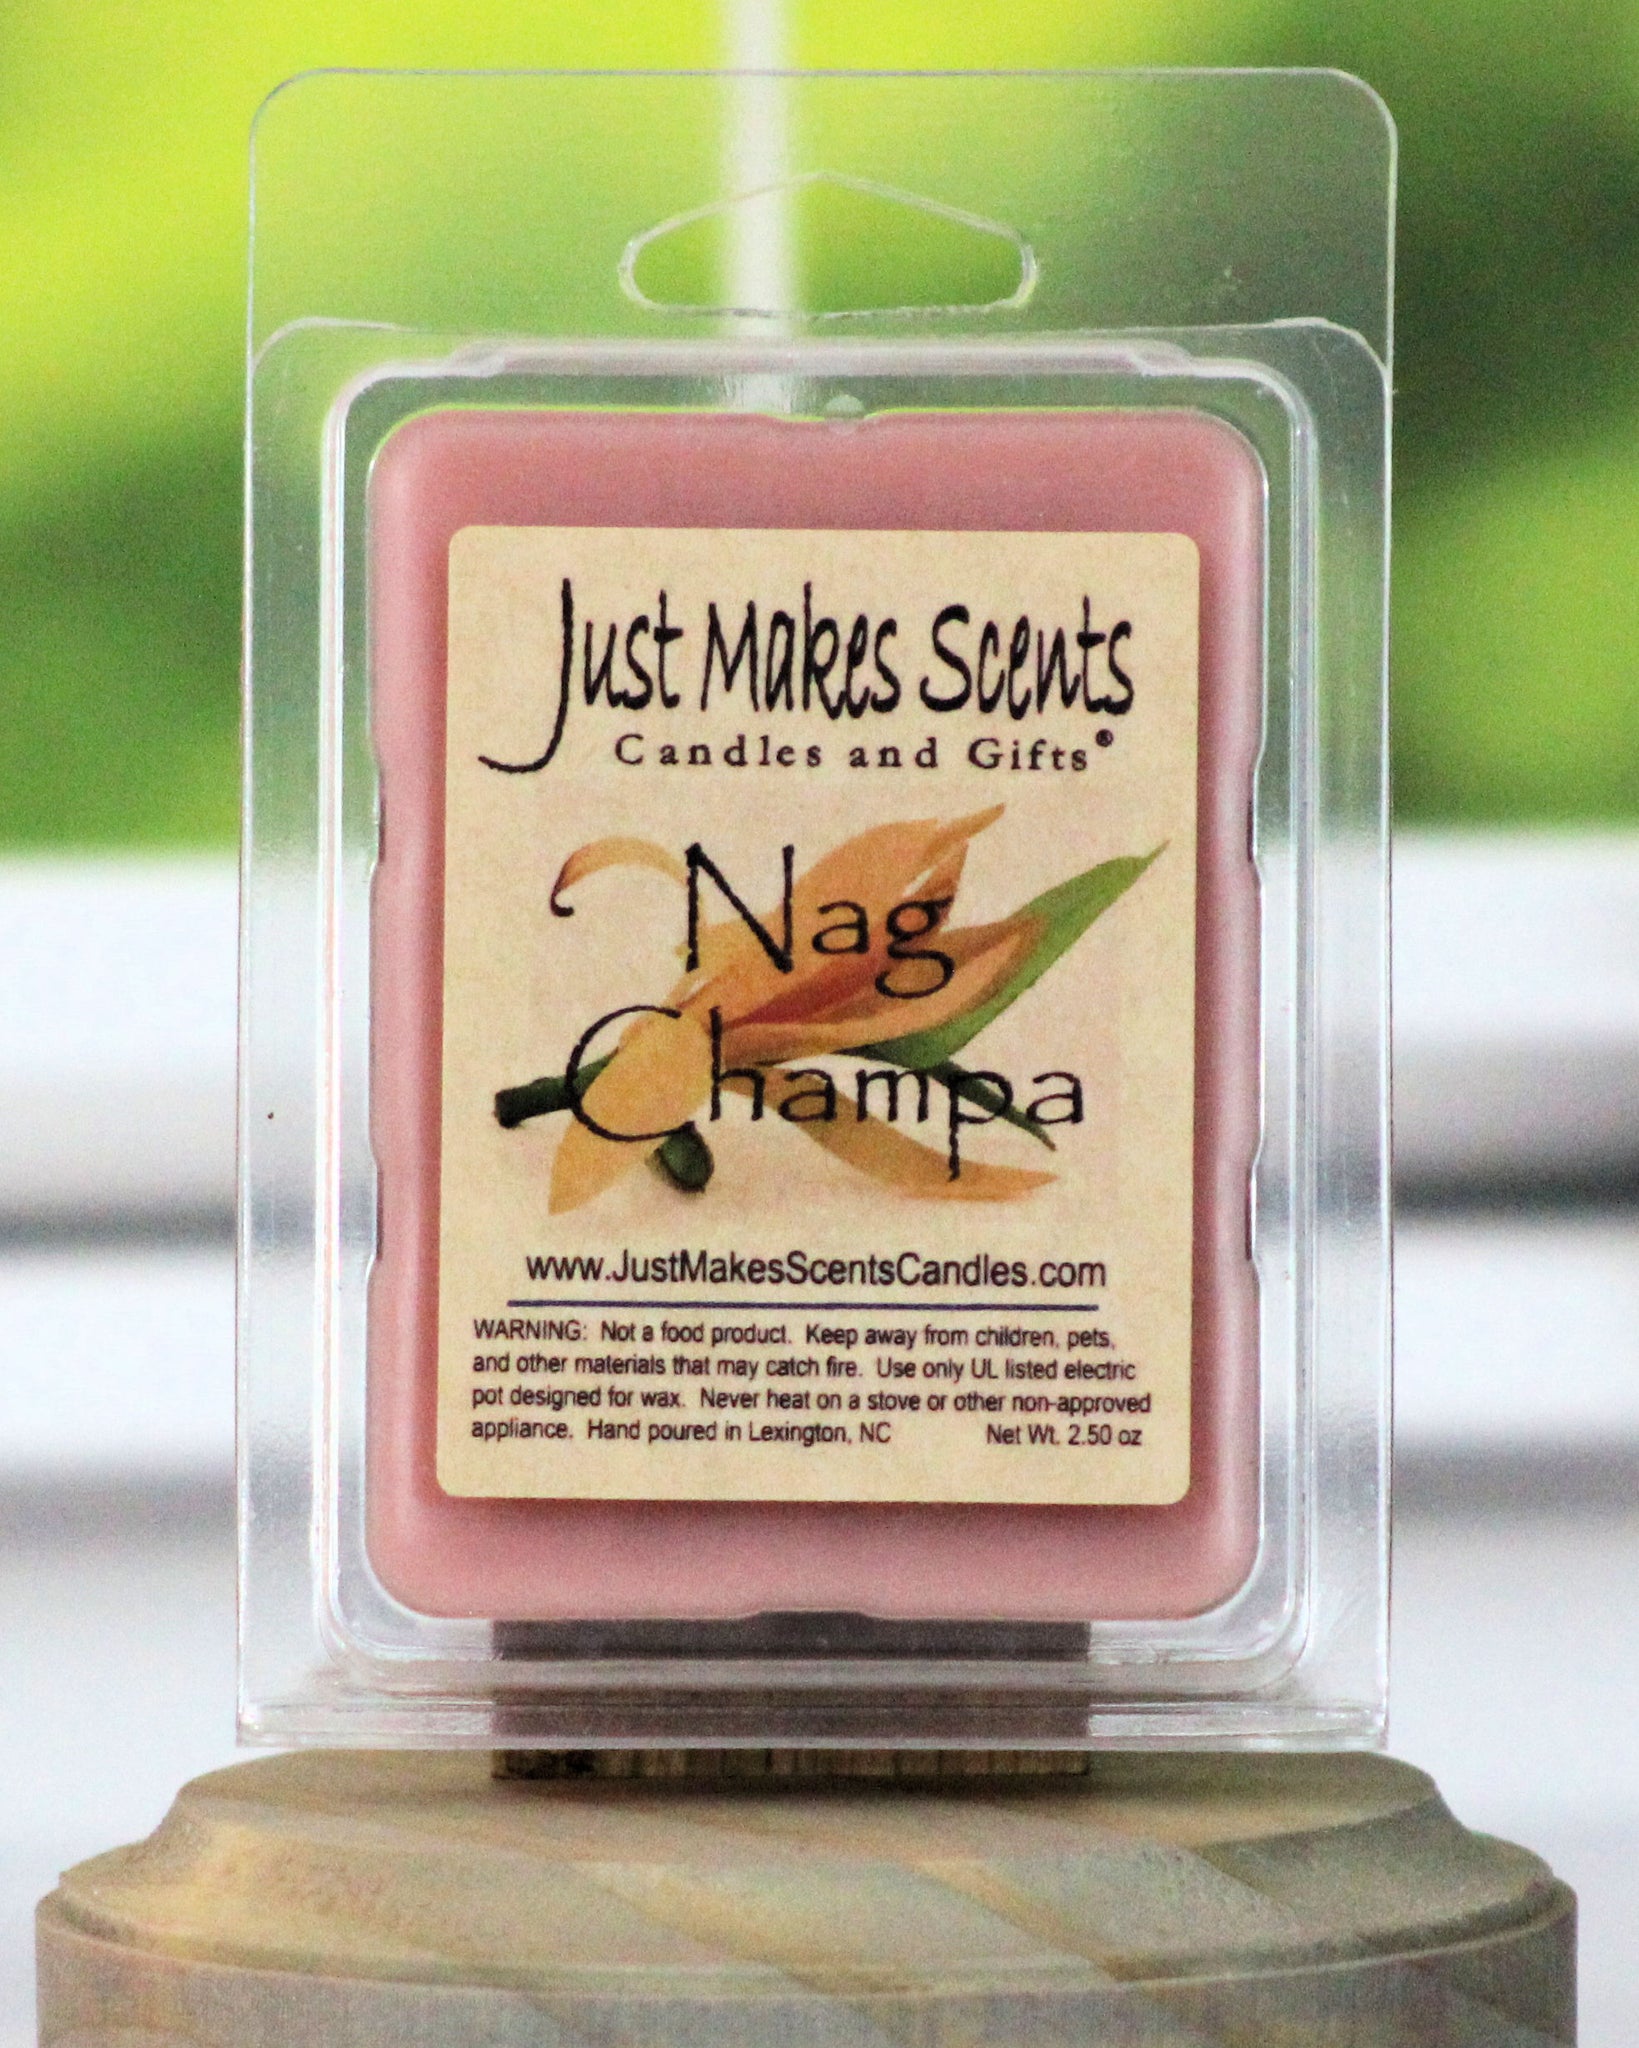 Strong Scented Sandalwood Wax Melts Bag of 10